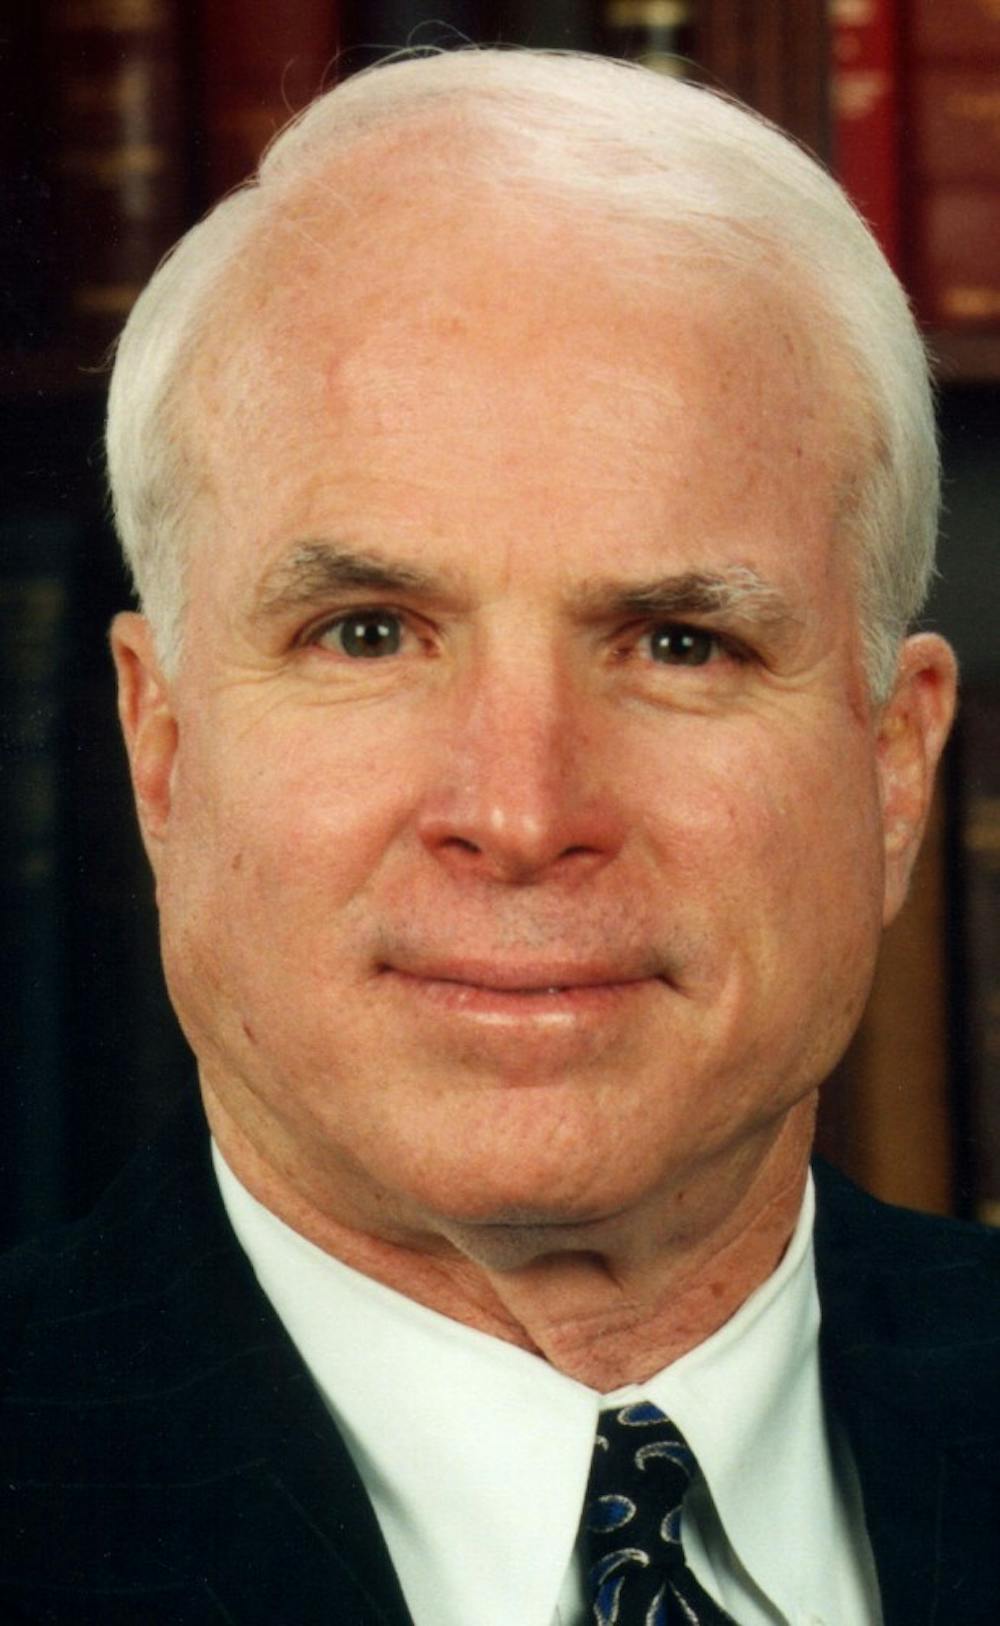 McCain supports telecom industry on Net regulation